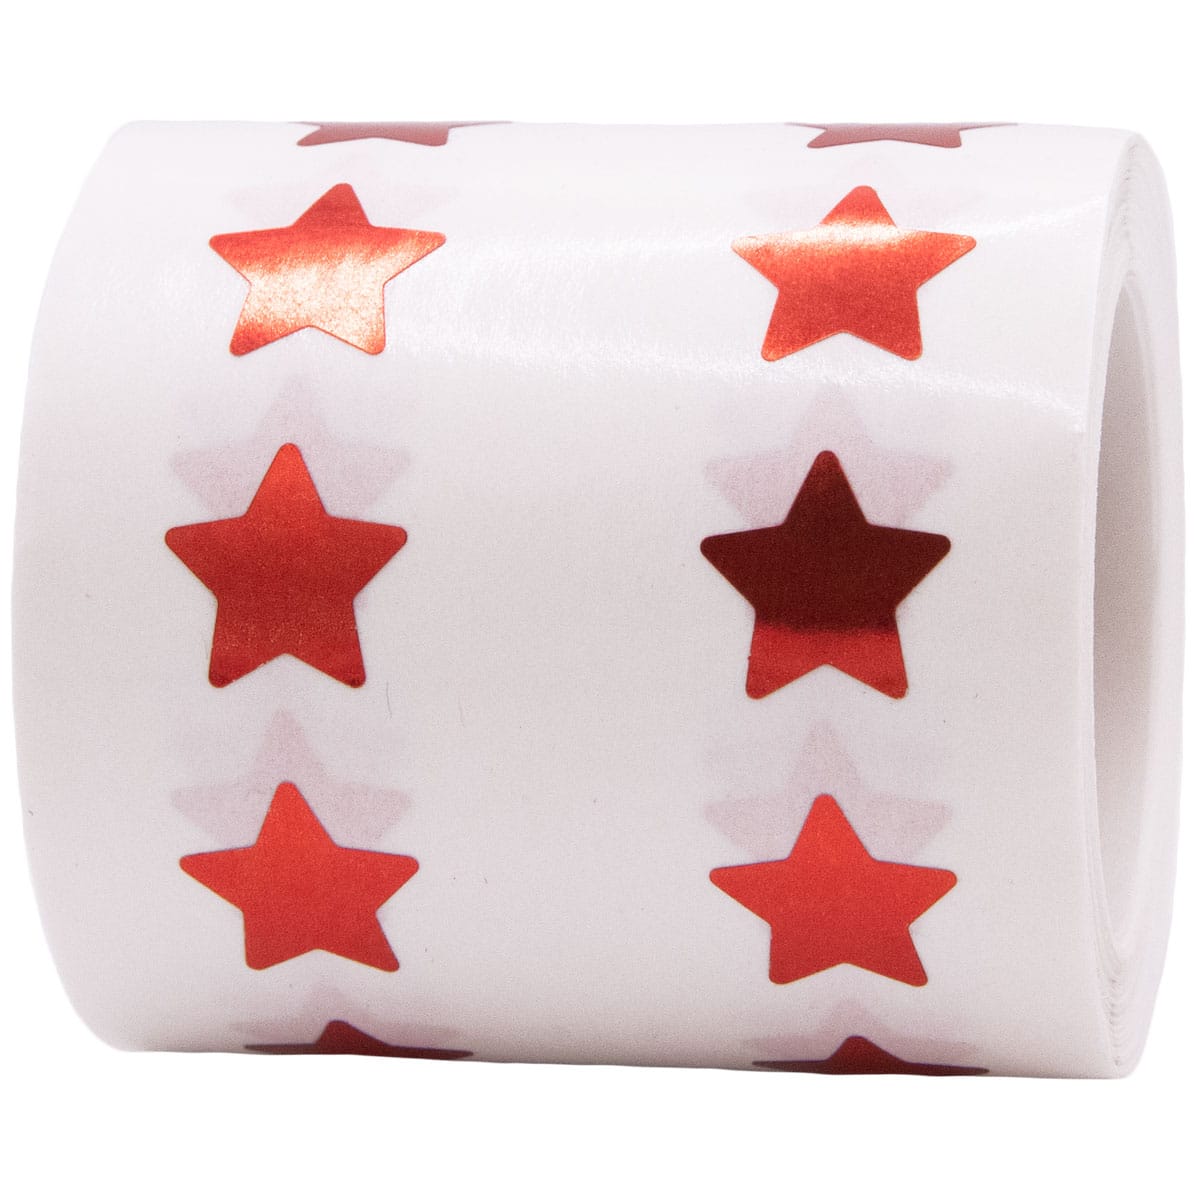 Small Star Circle Stickers, 1/2-inch Star Stickers